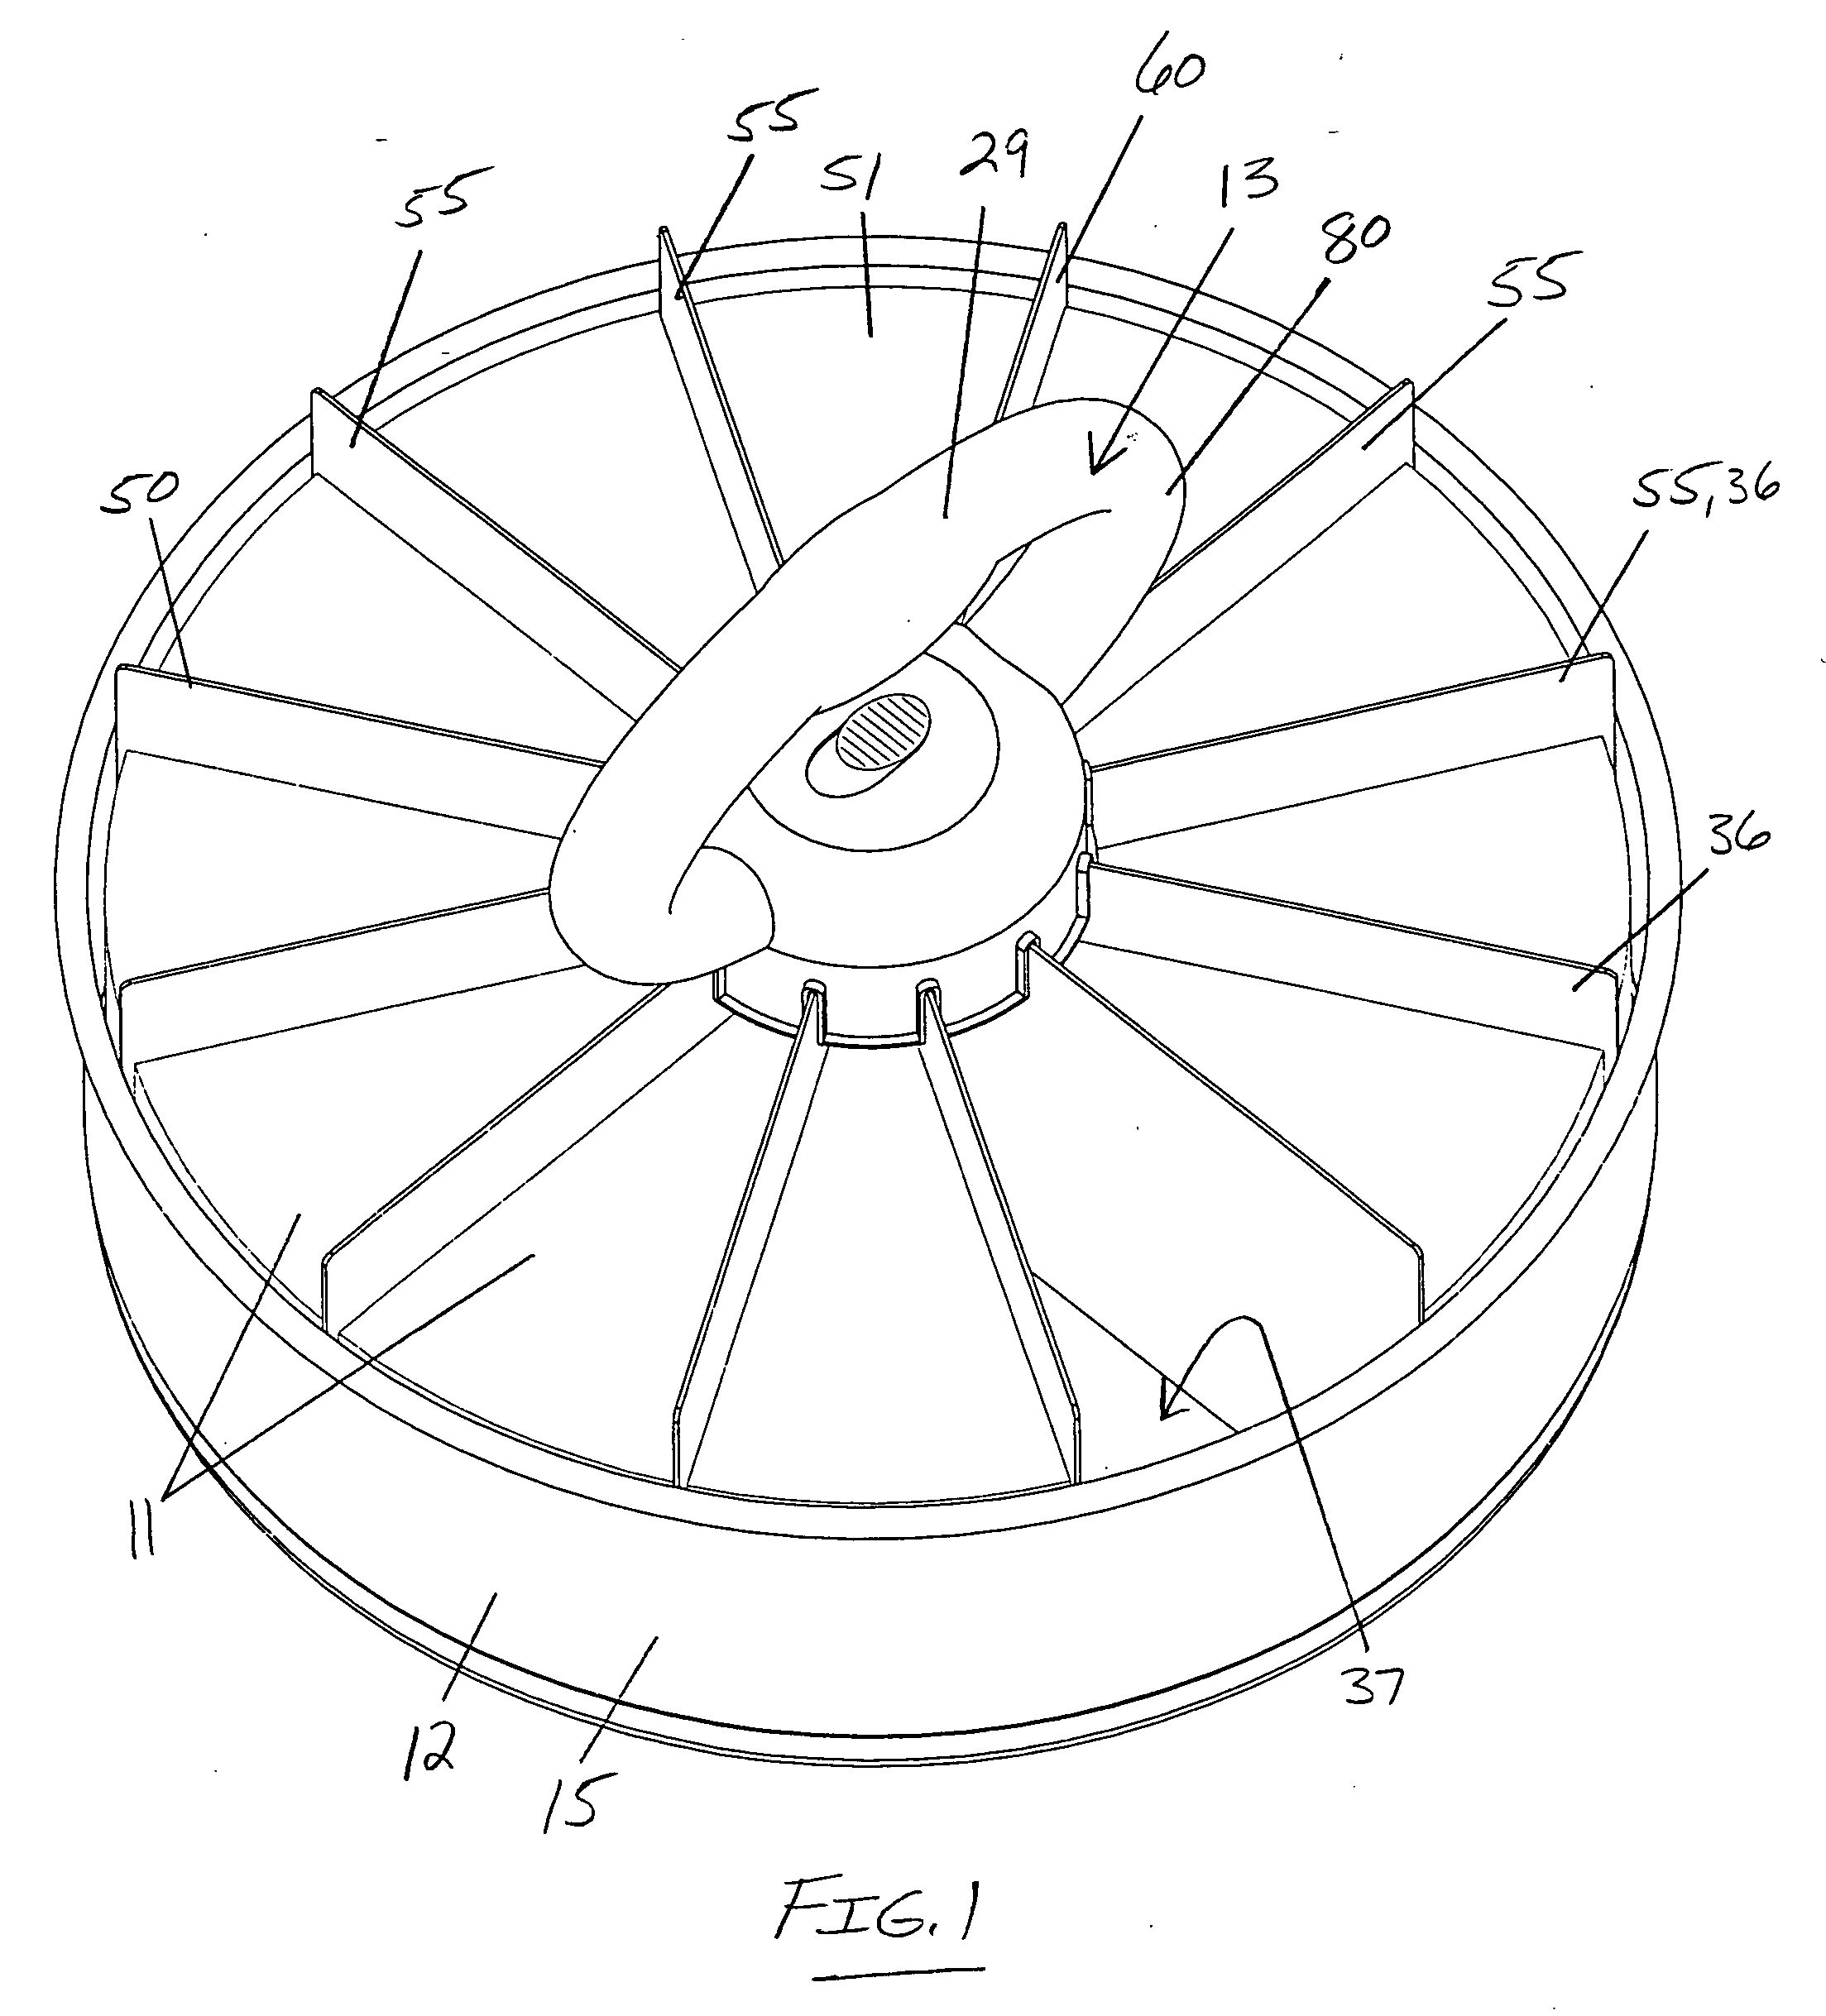 Food presentation system and assembly therefor